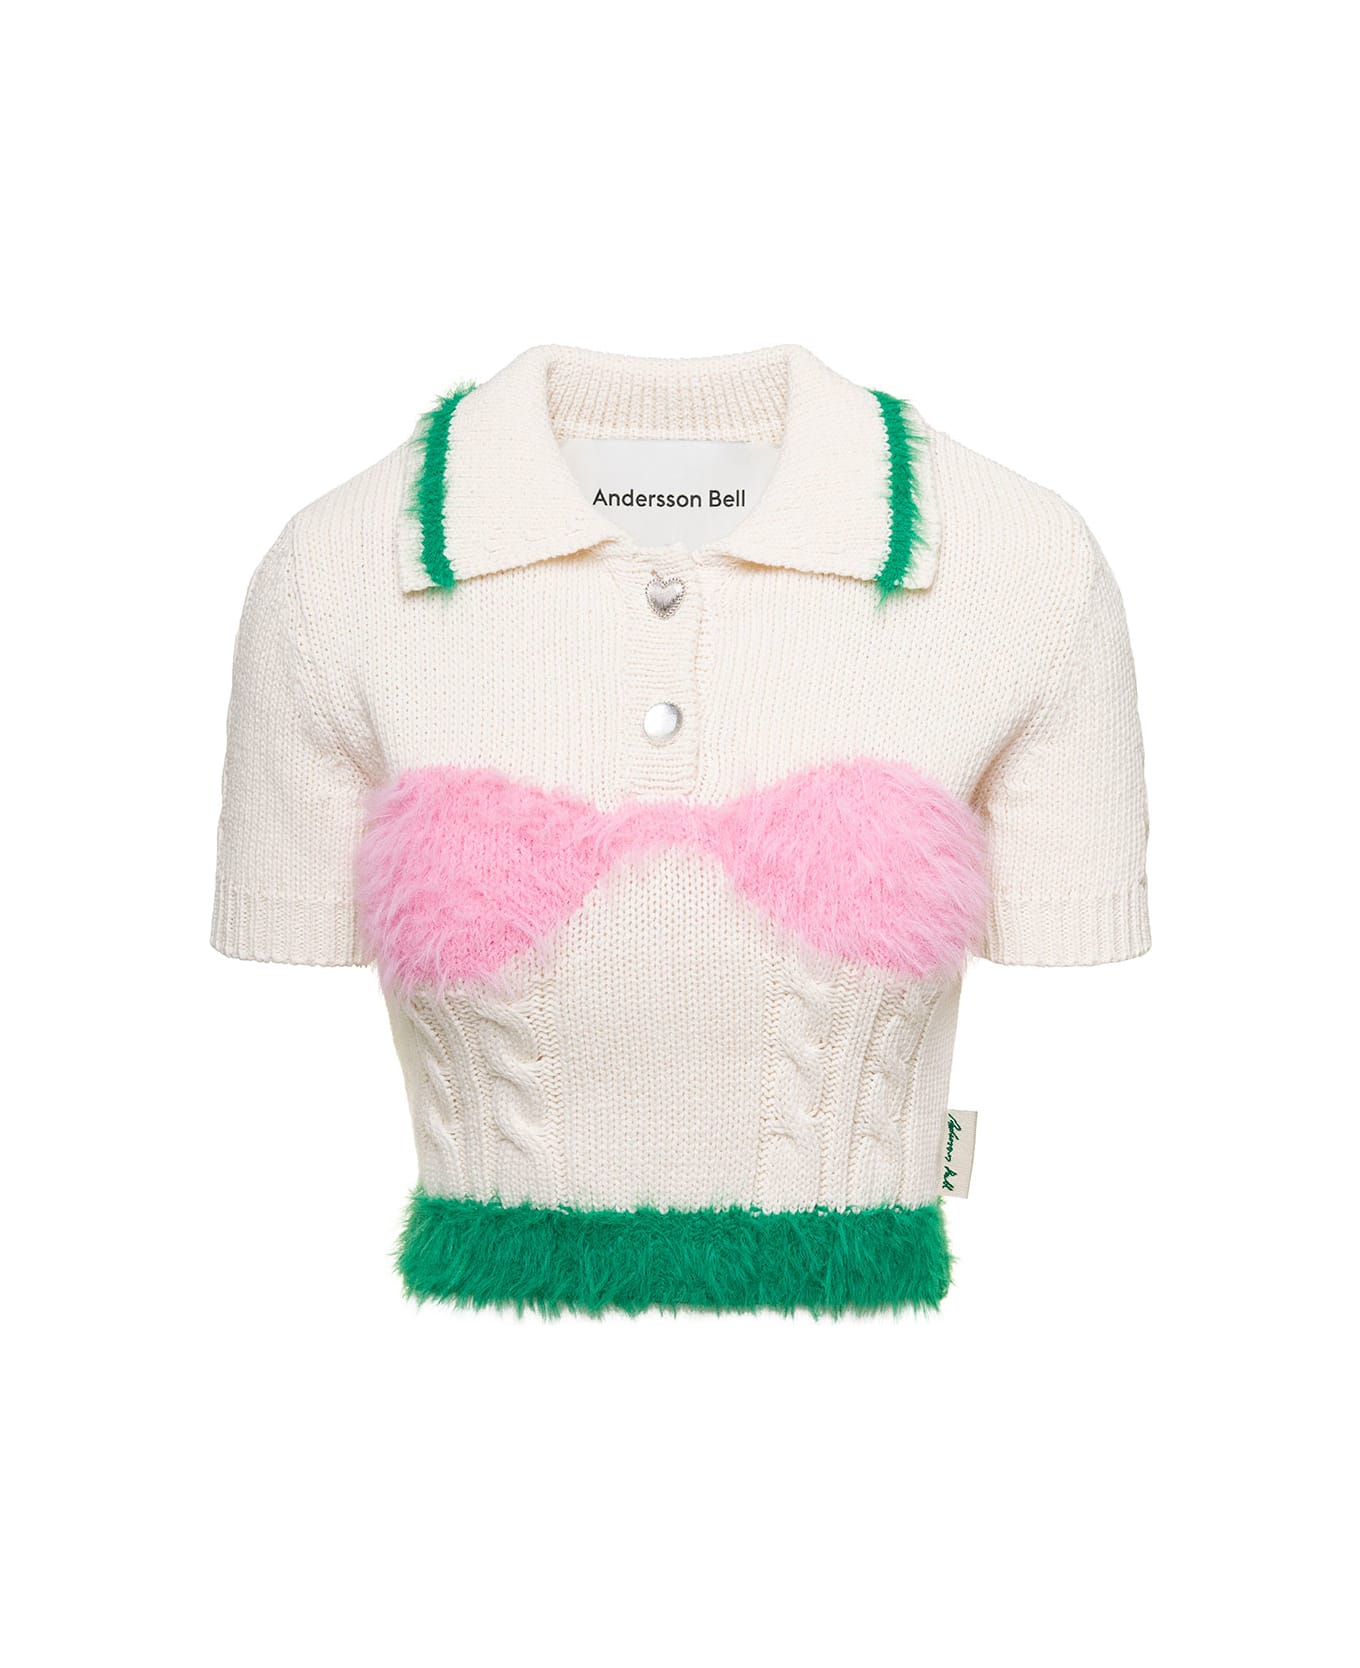 Andersson Bell 'hayes Lingerie' White Knit Top With Lingerie Intarsia In Cotton Woman - White